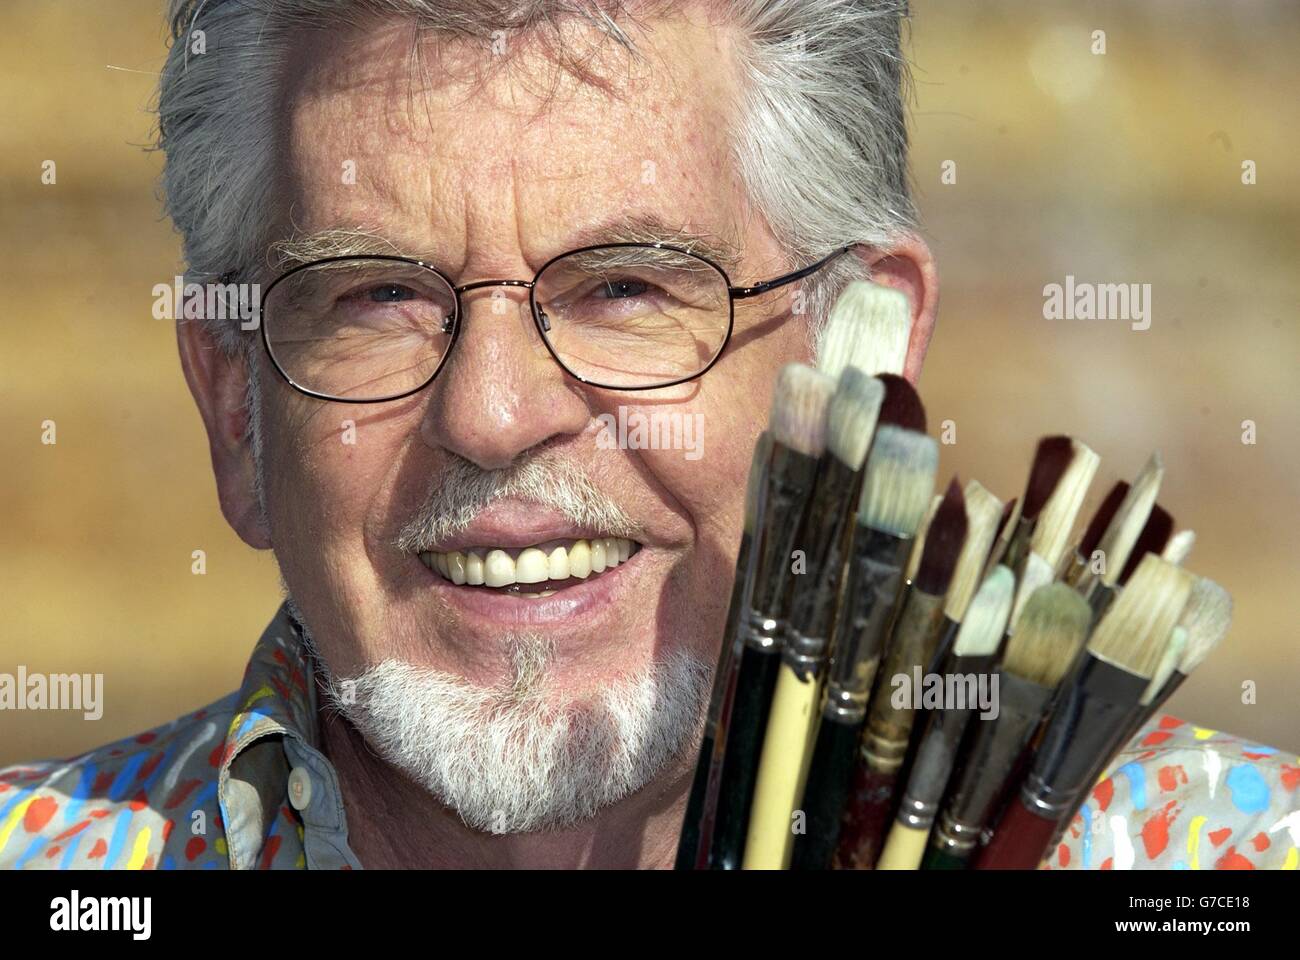 Artist Rolf Harris during a photocall to launch the world's biggest free art party, Art on the Square: Join the Party, at Trafalgar Square in central London. The party which takes place on Sunday 26 September at Trafalgar Square, marks the national launch of The Big Draw 2004, the biggest free art event in the UK. Stock Photo